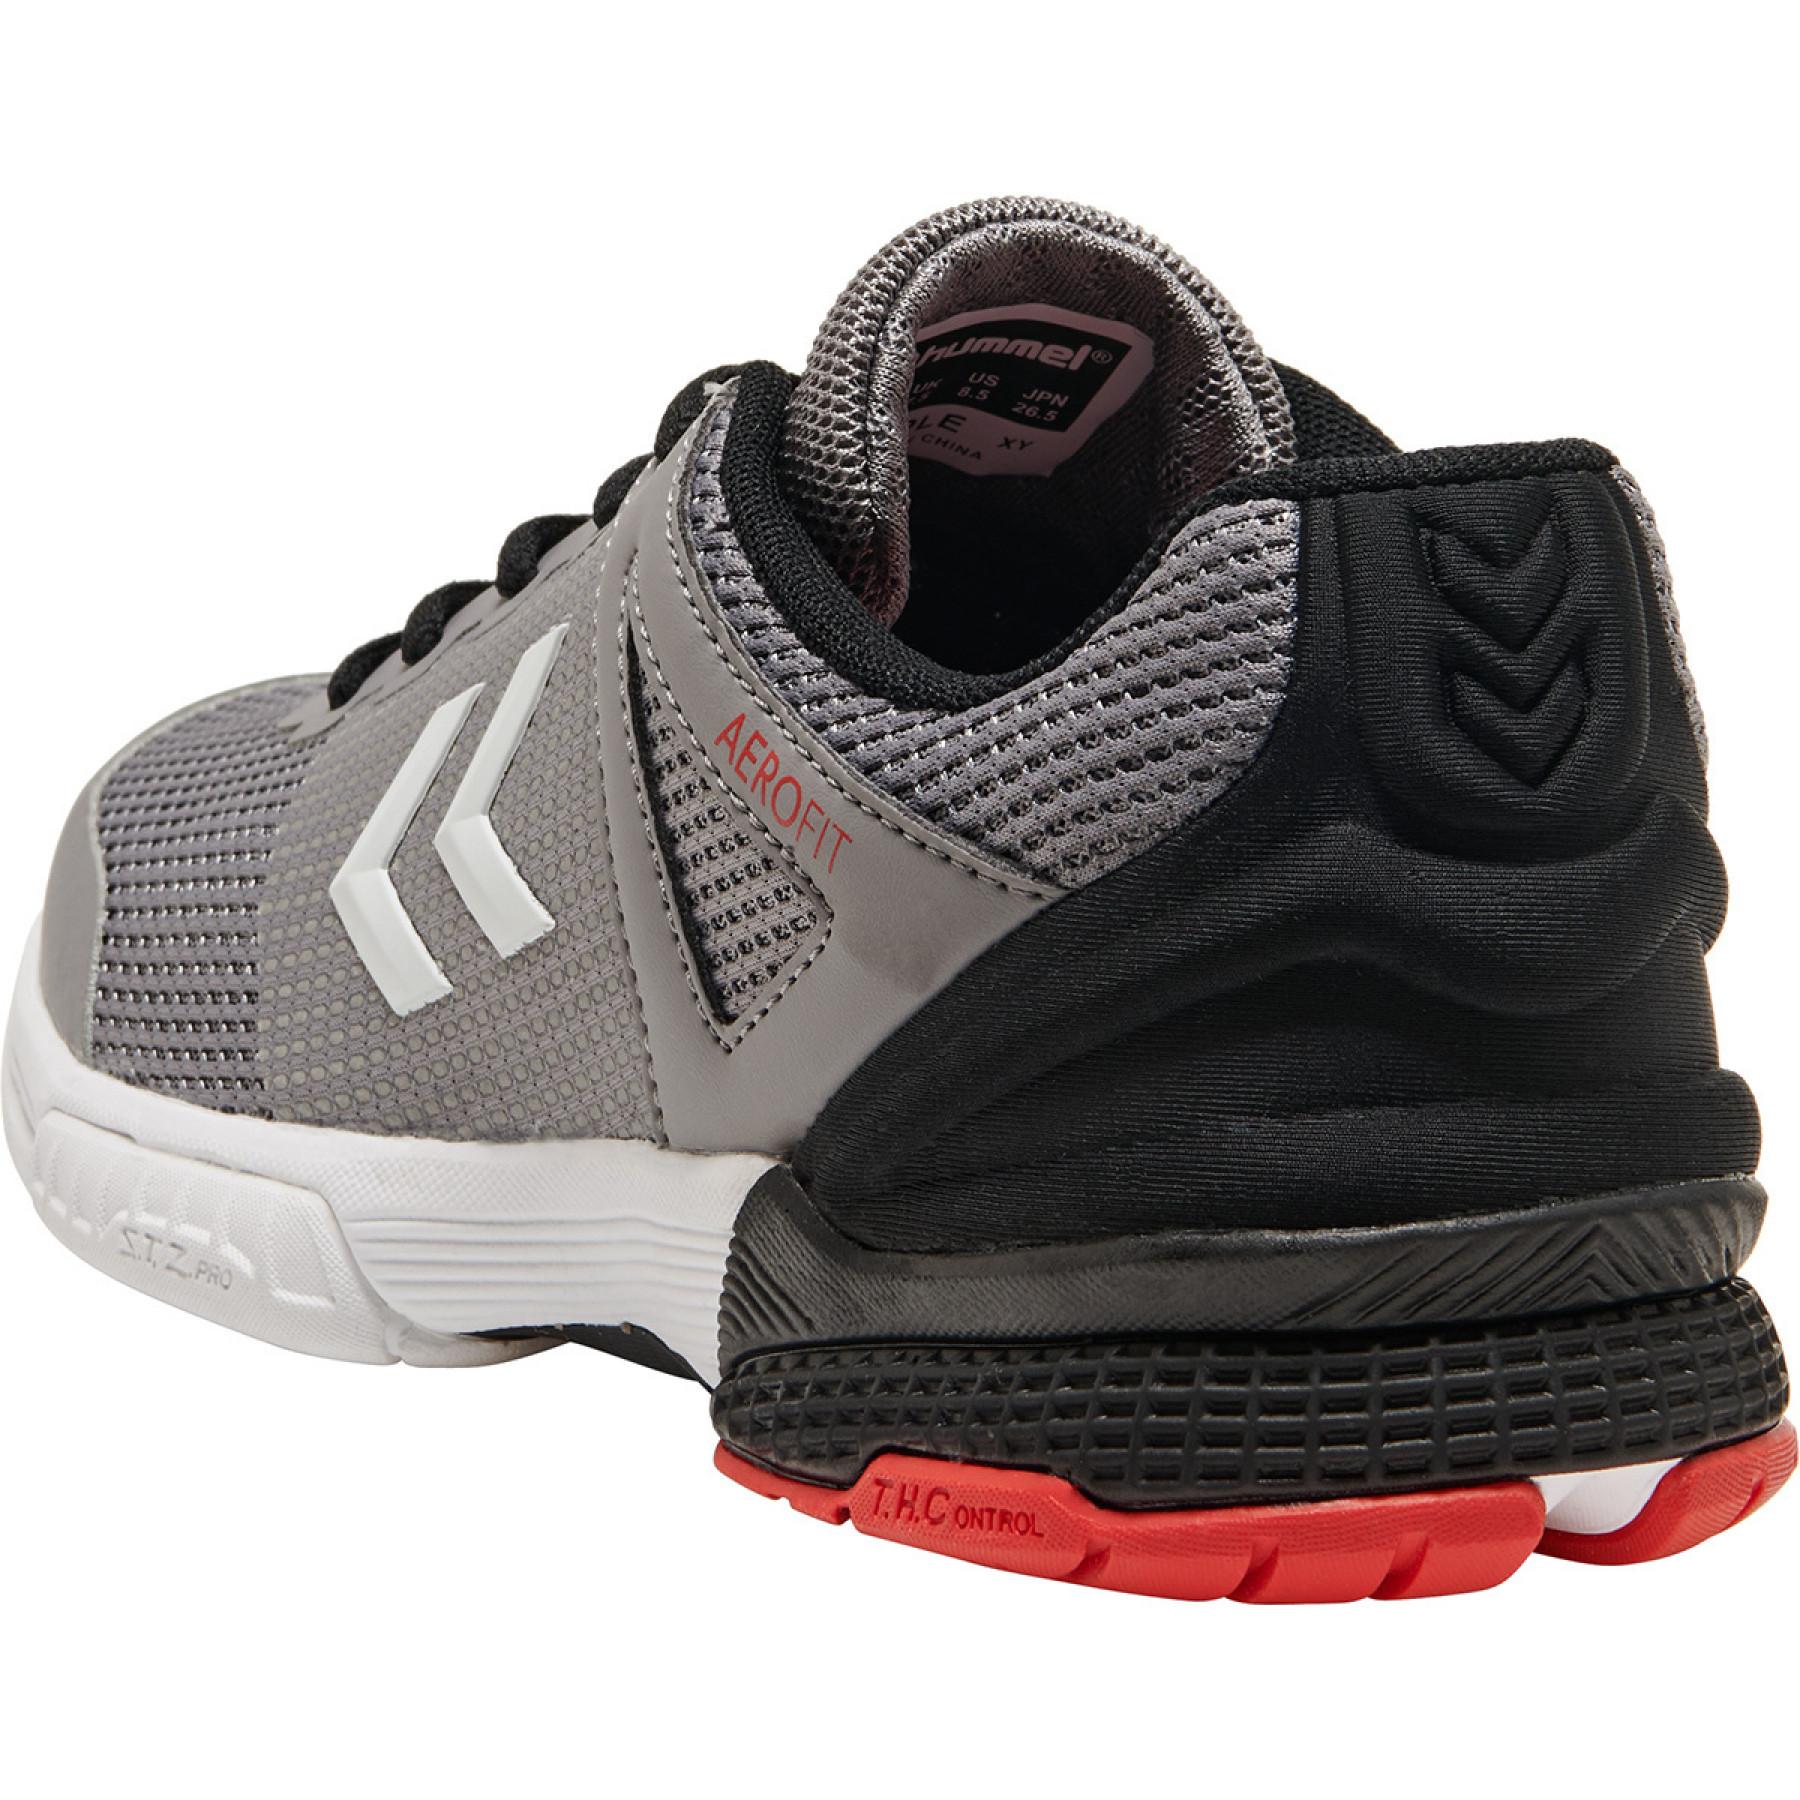 Shoes Hummel Aerocharge Hb180 Rely 3.0 Trophy